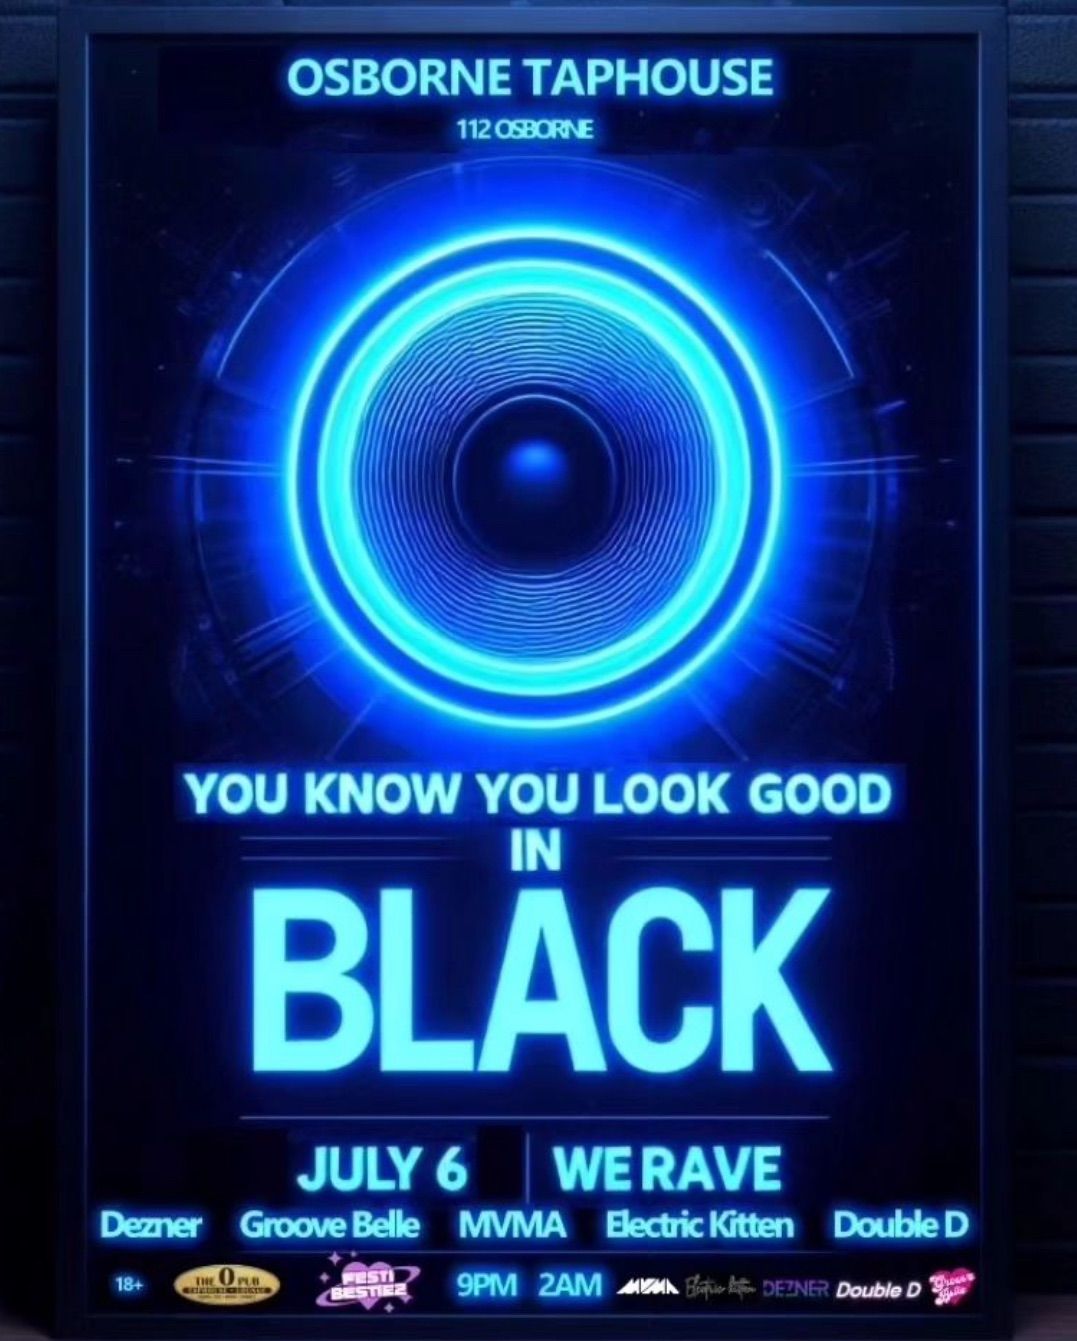 You Know You Look Good in Black Rave at Osborne Taphouse!